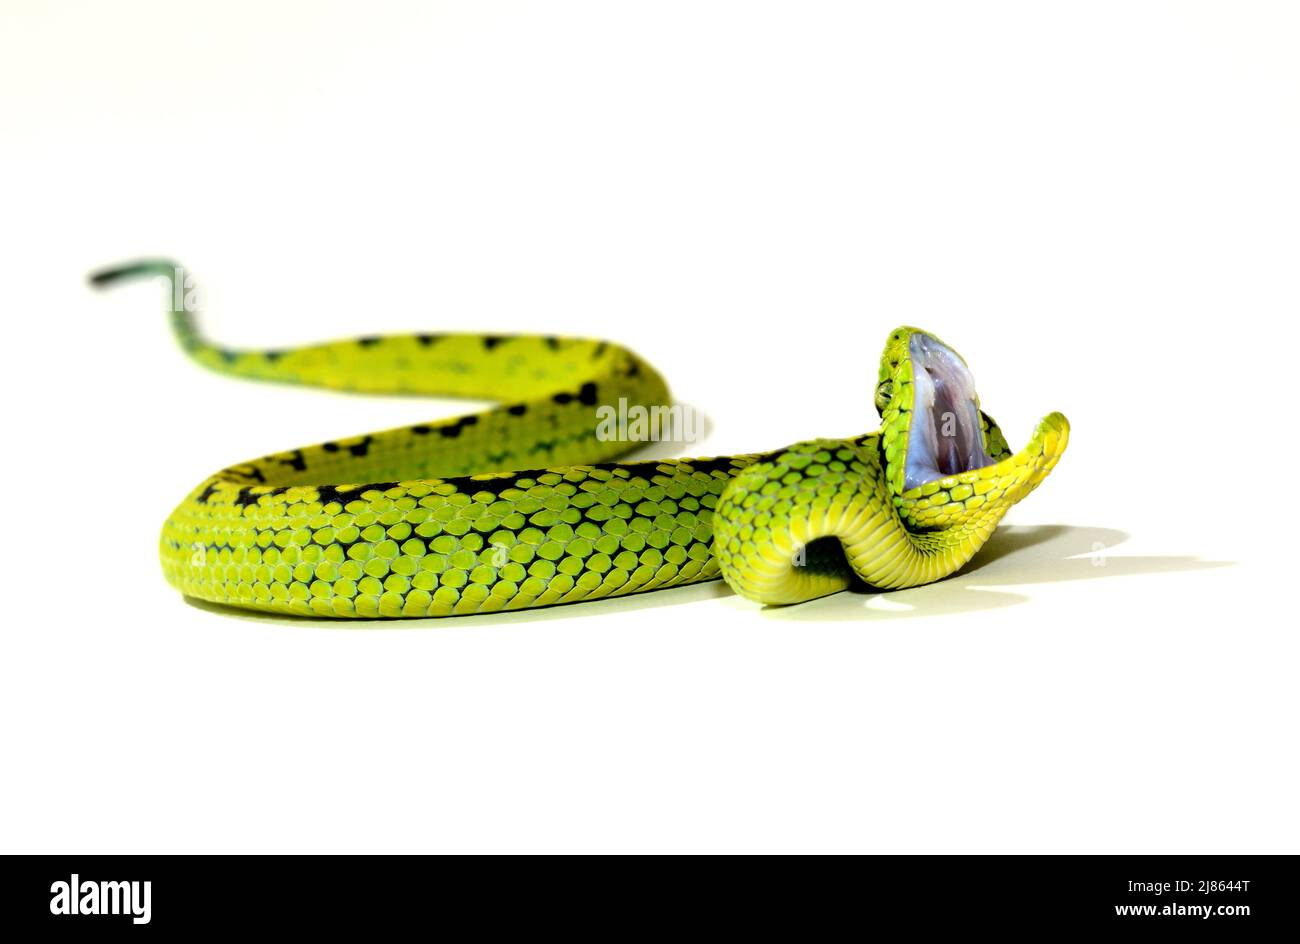 Yellow-blotched palm Pitviper on with background Stock Photo